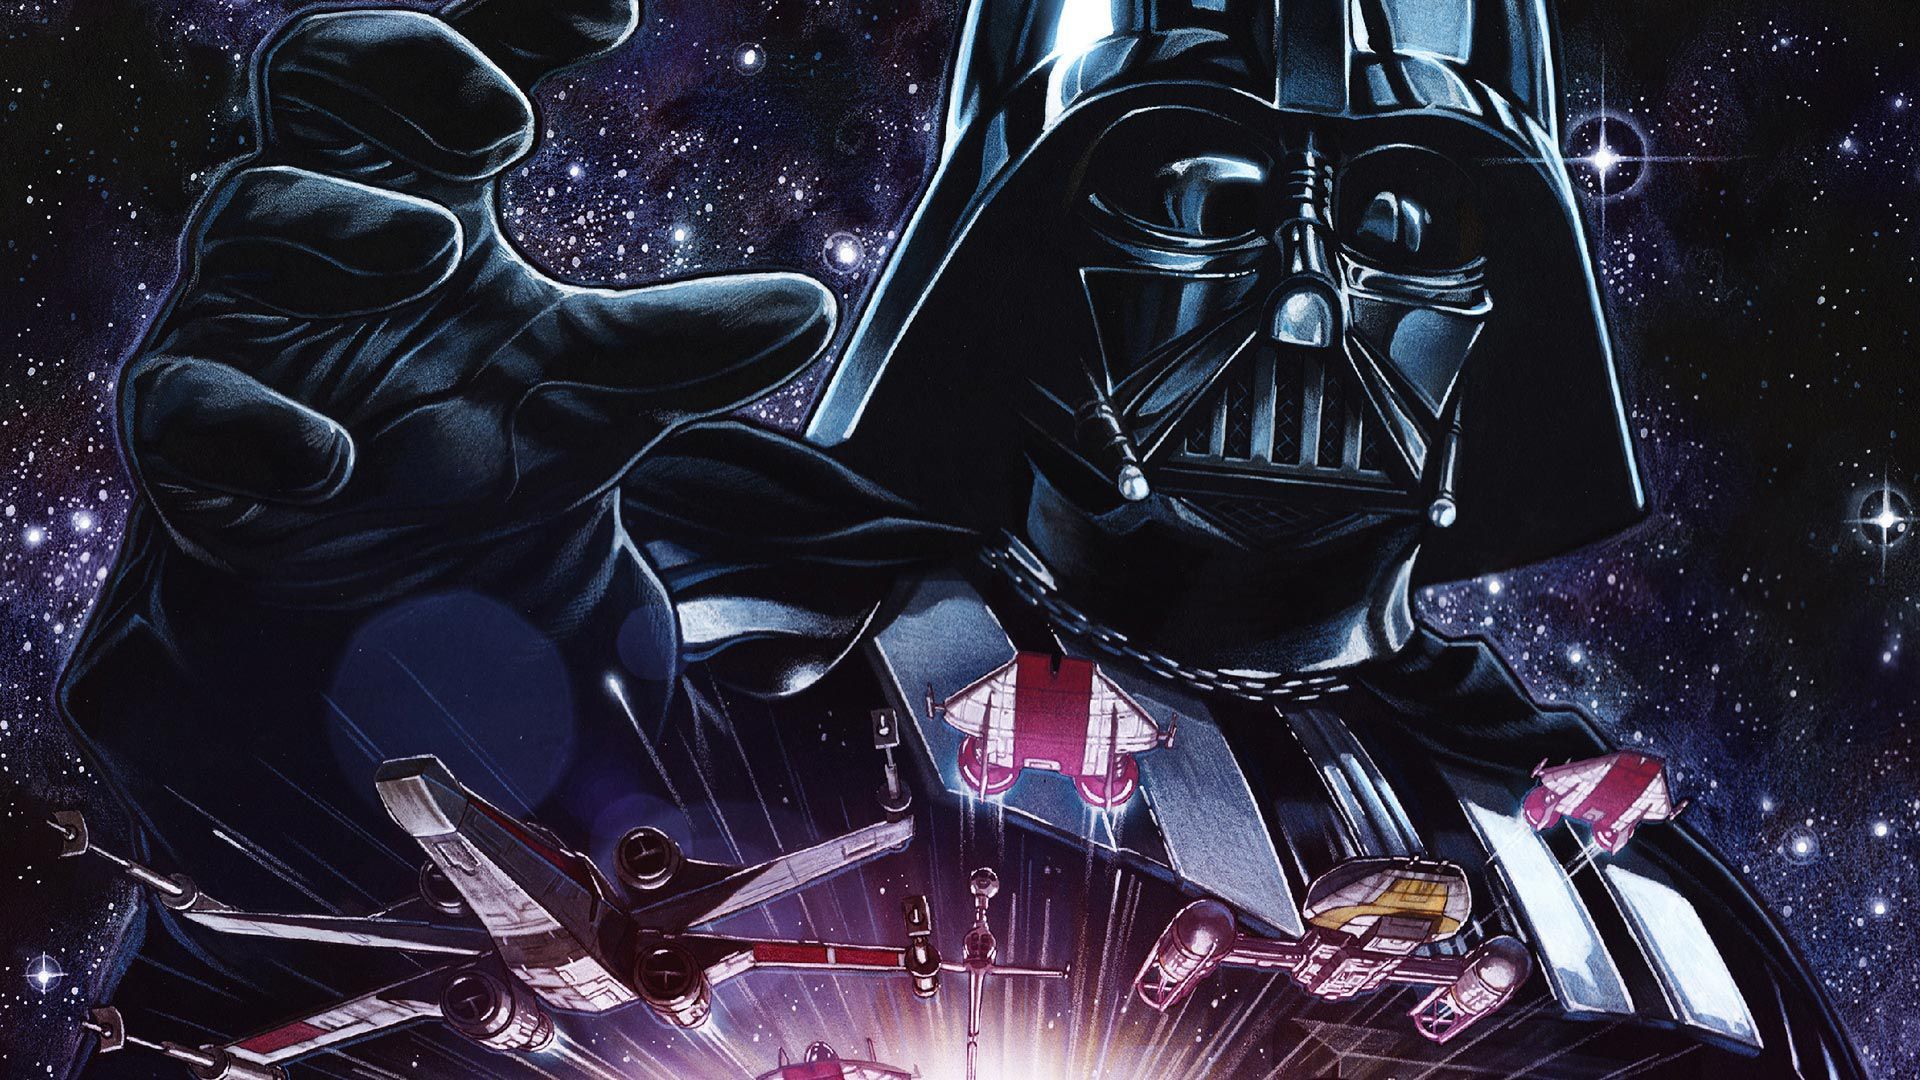 Star Wars: Darth Vader: In the last volume there is an unexpected reunion 〜 Anime Sweet